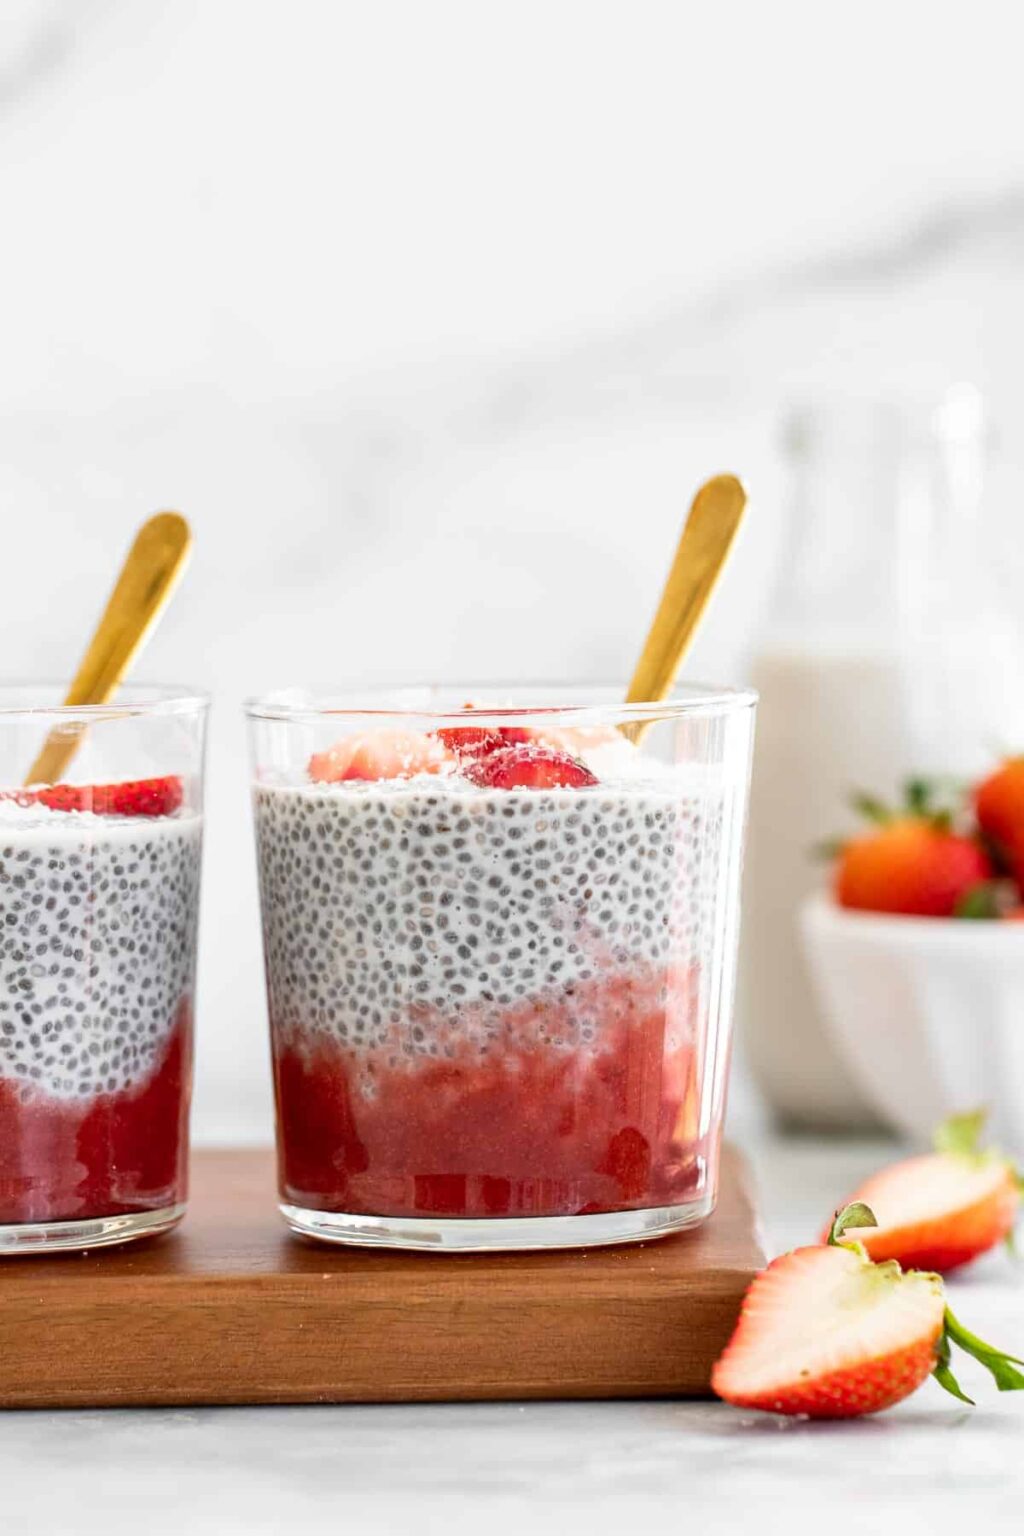 Strawberry Coconut Chia Pudding - Eat With Clarity